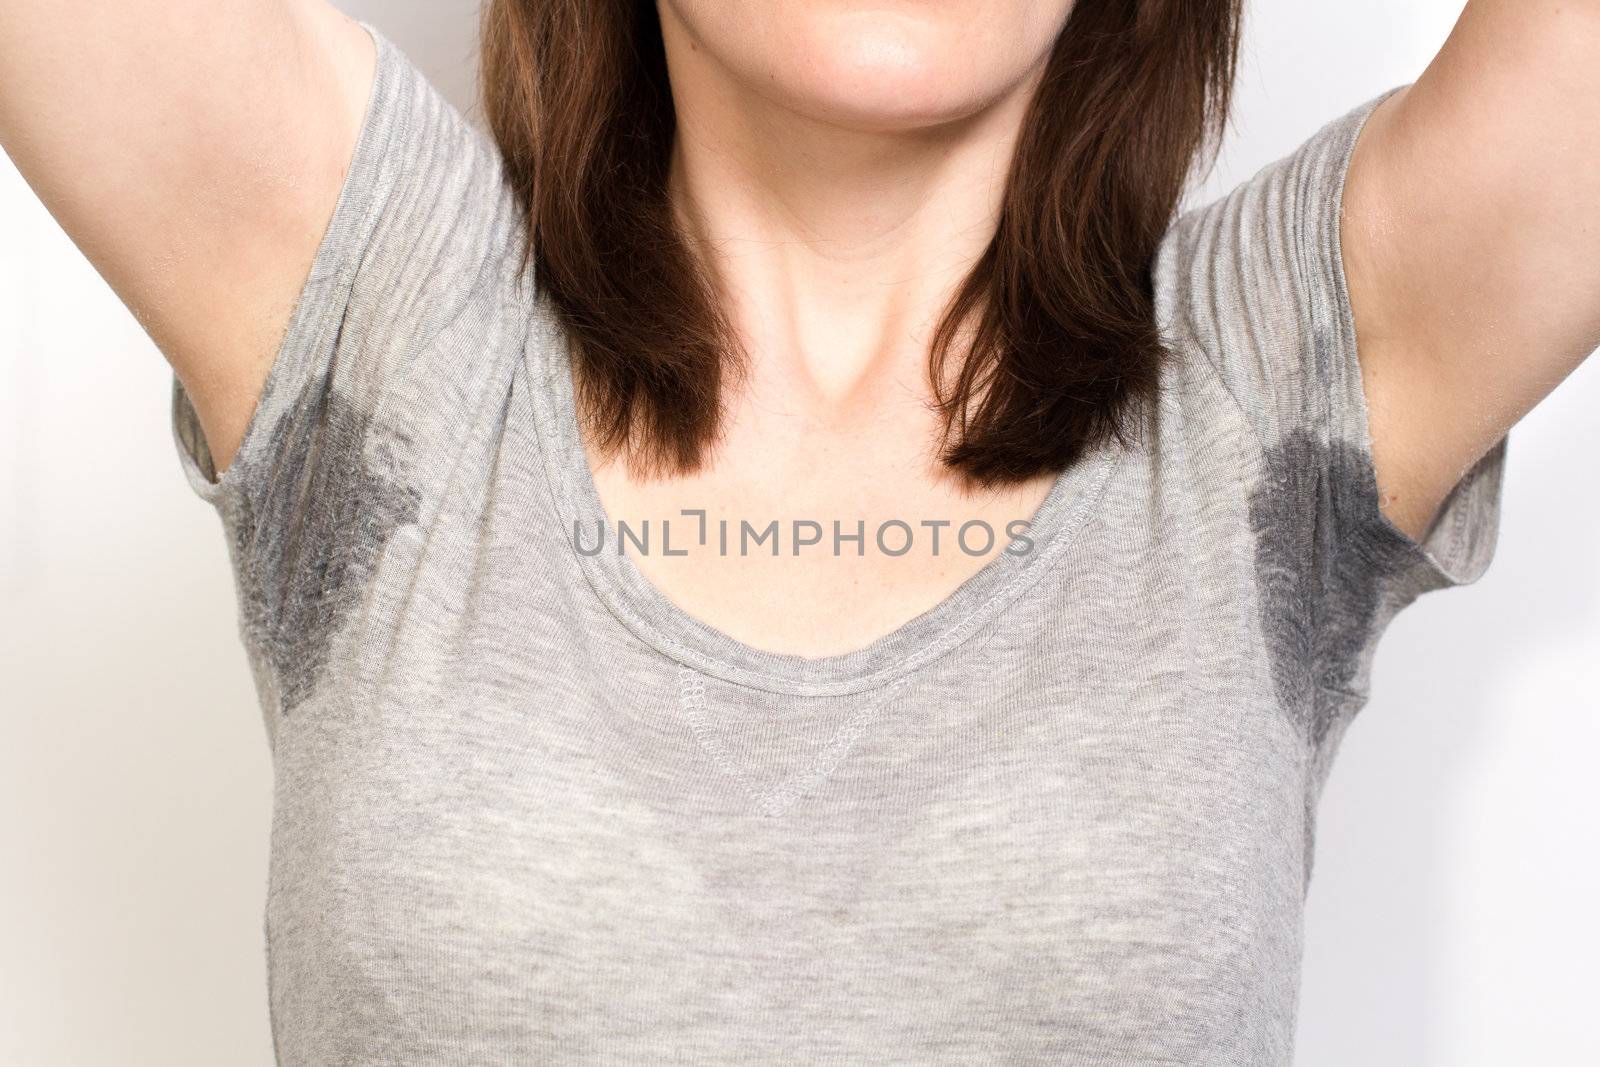 Woman sweating very badly under armpit and holding nose